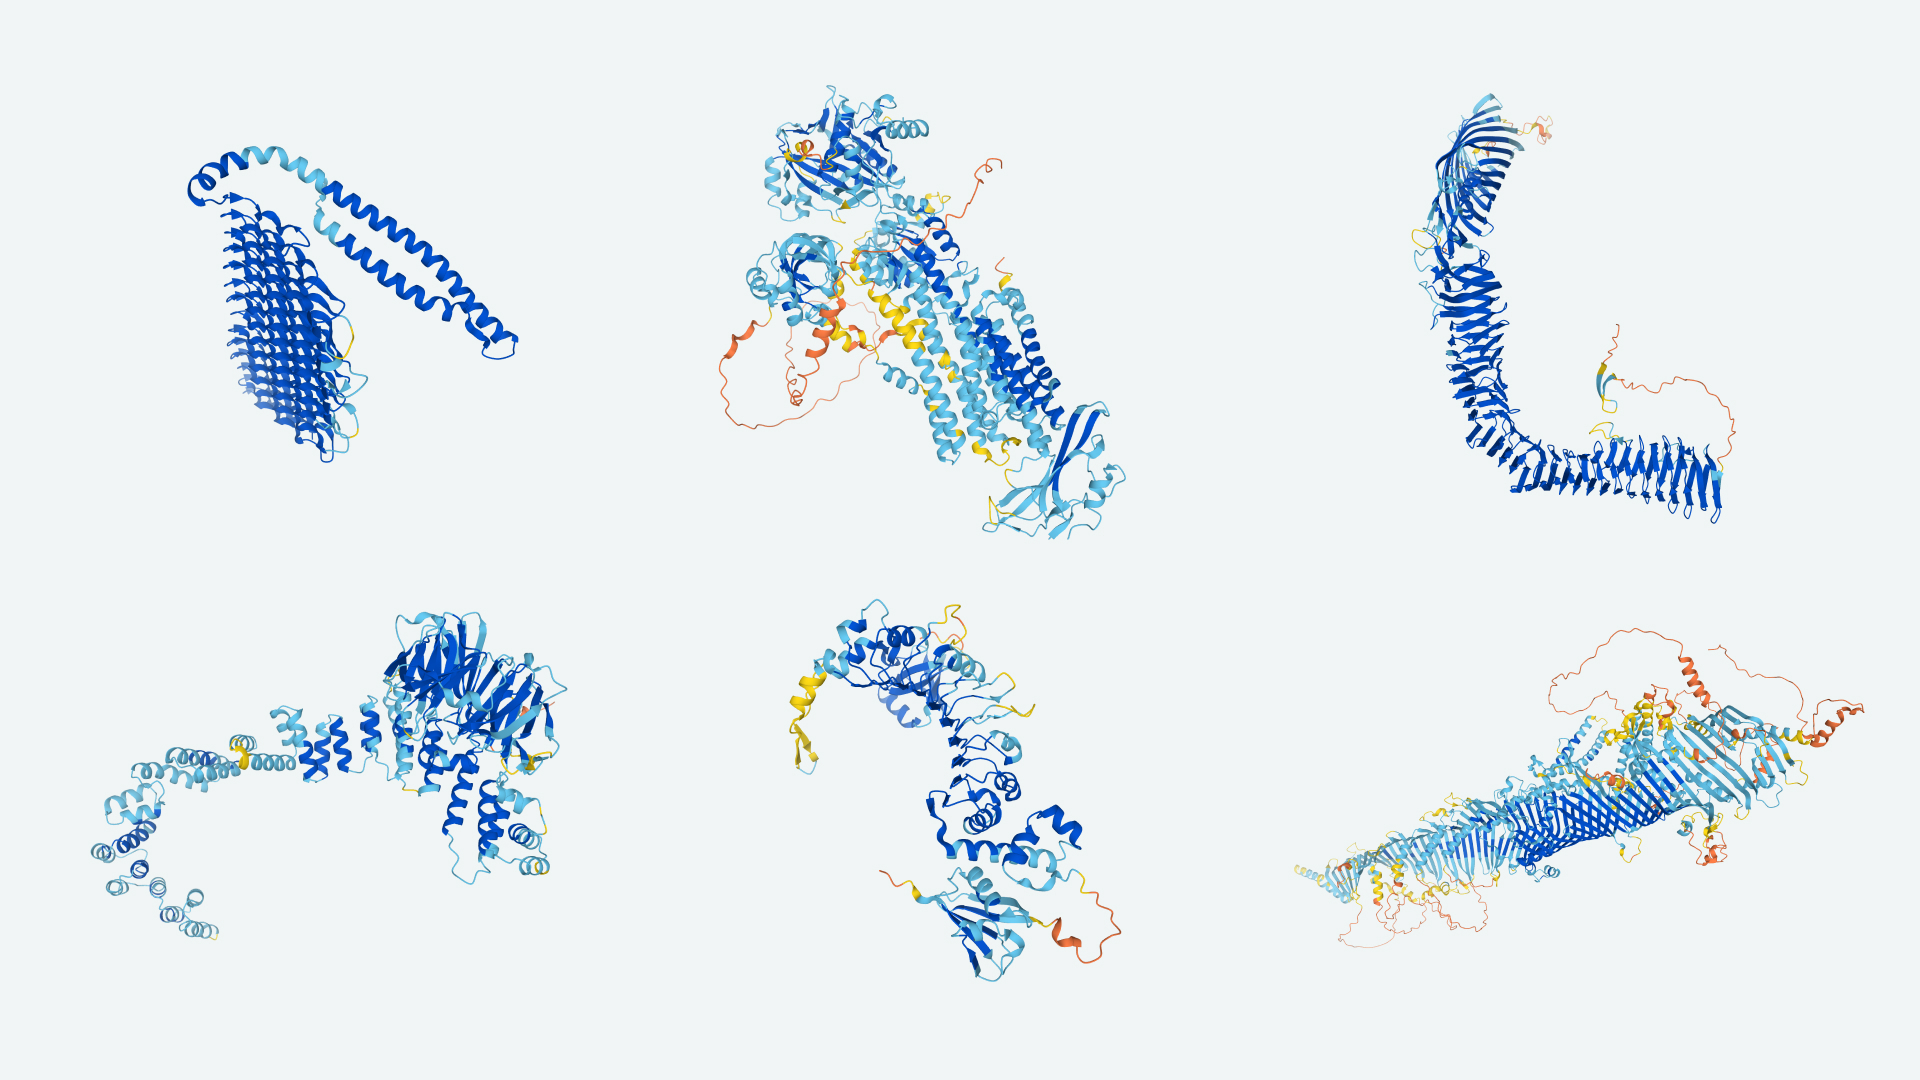 Deepmind's Alphafold created 3D images of protein structures